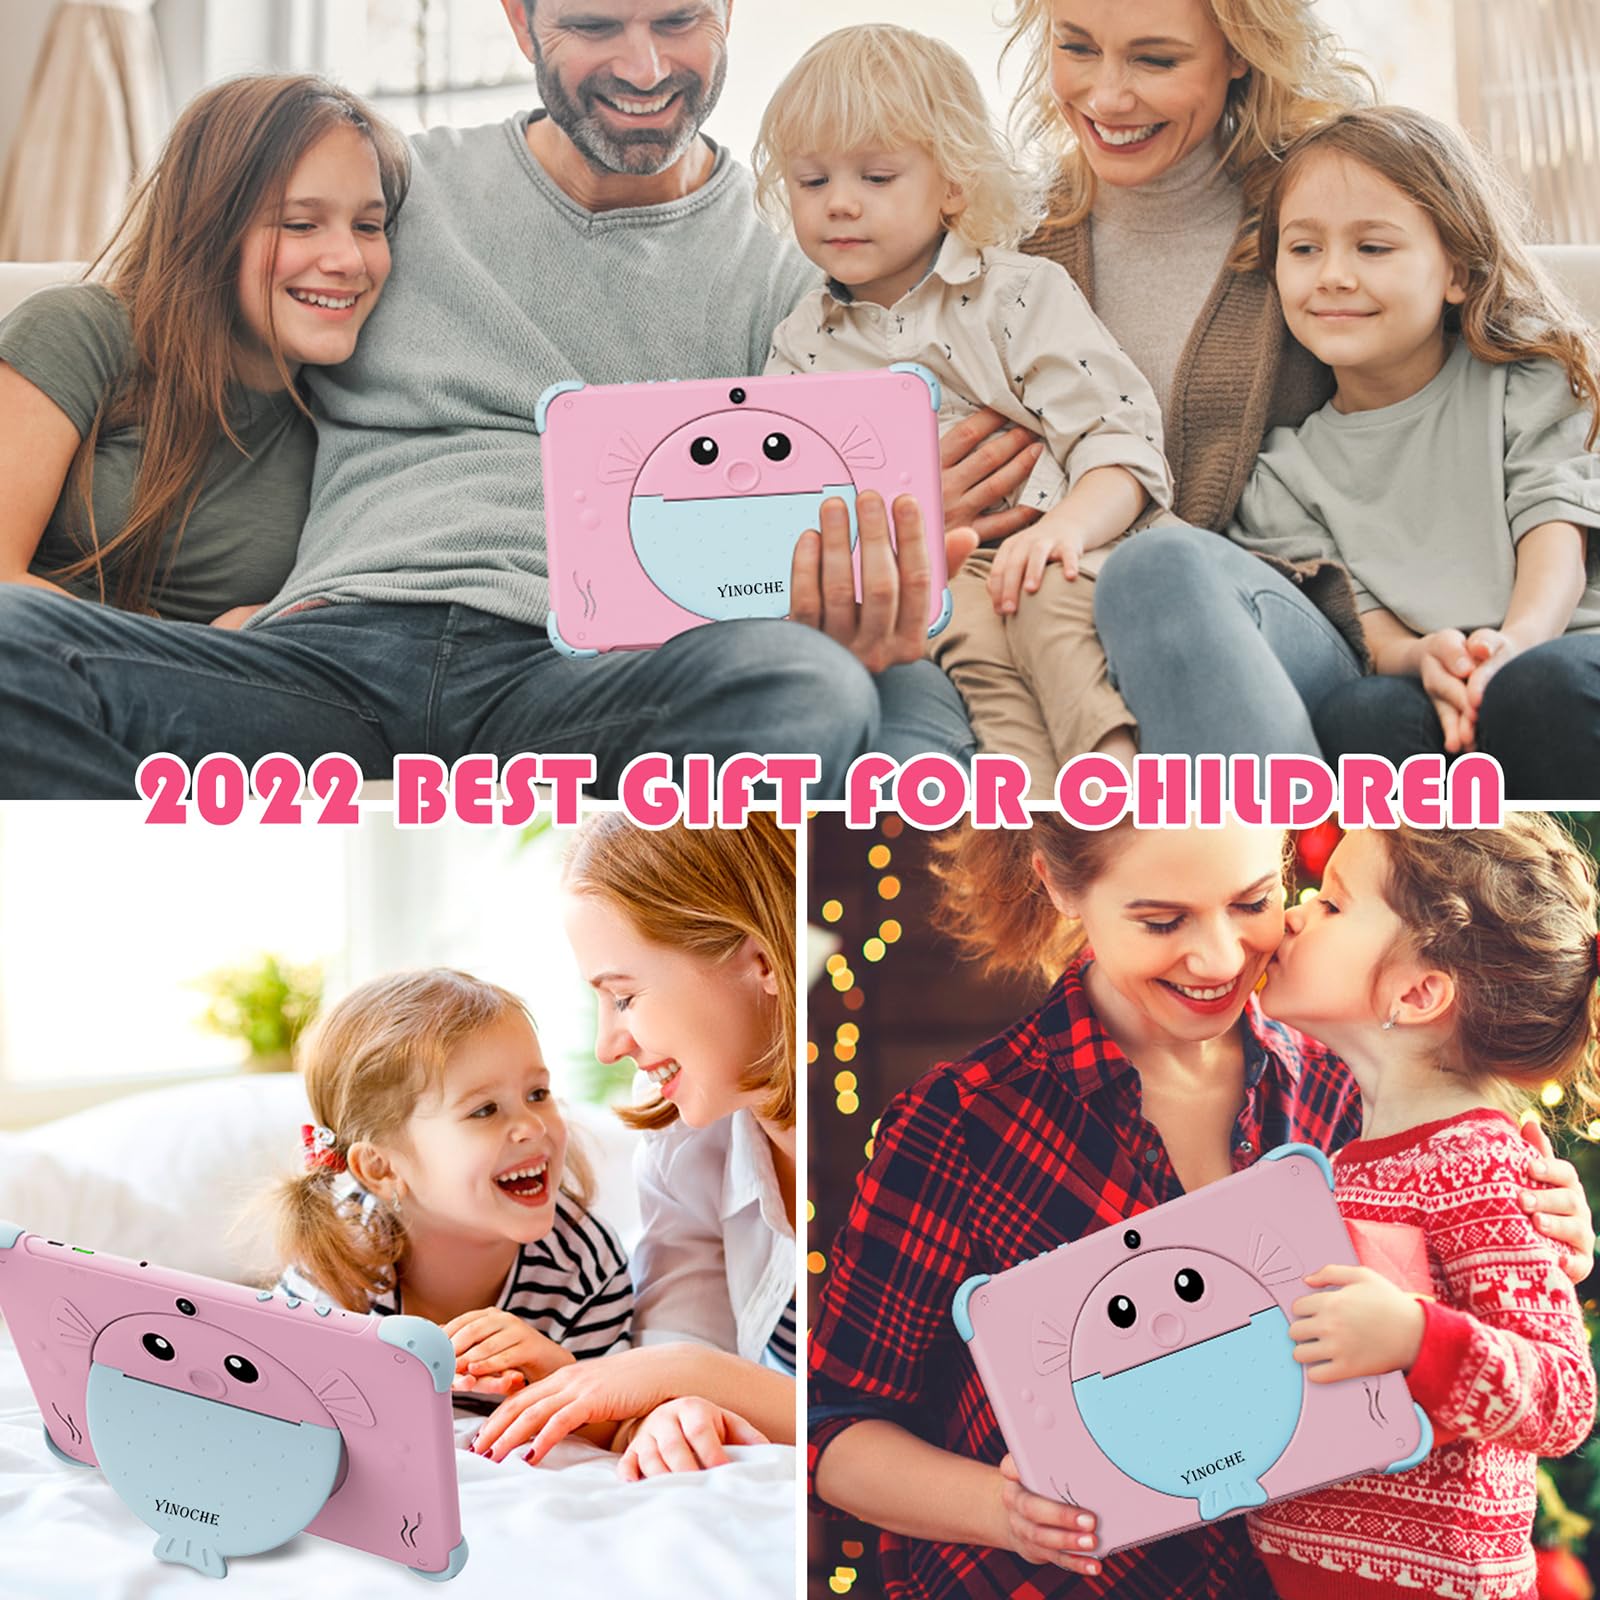 Kids Tablet 10.1 inch Toddler Tablet for Kids WiFi Kids Tablets Android with Dual Camera Android 11.0 2GB 32GB ROM 1280x800 HD IPS Touchscreen Parental Control YouTube Neflix (Pink)